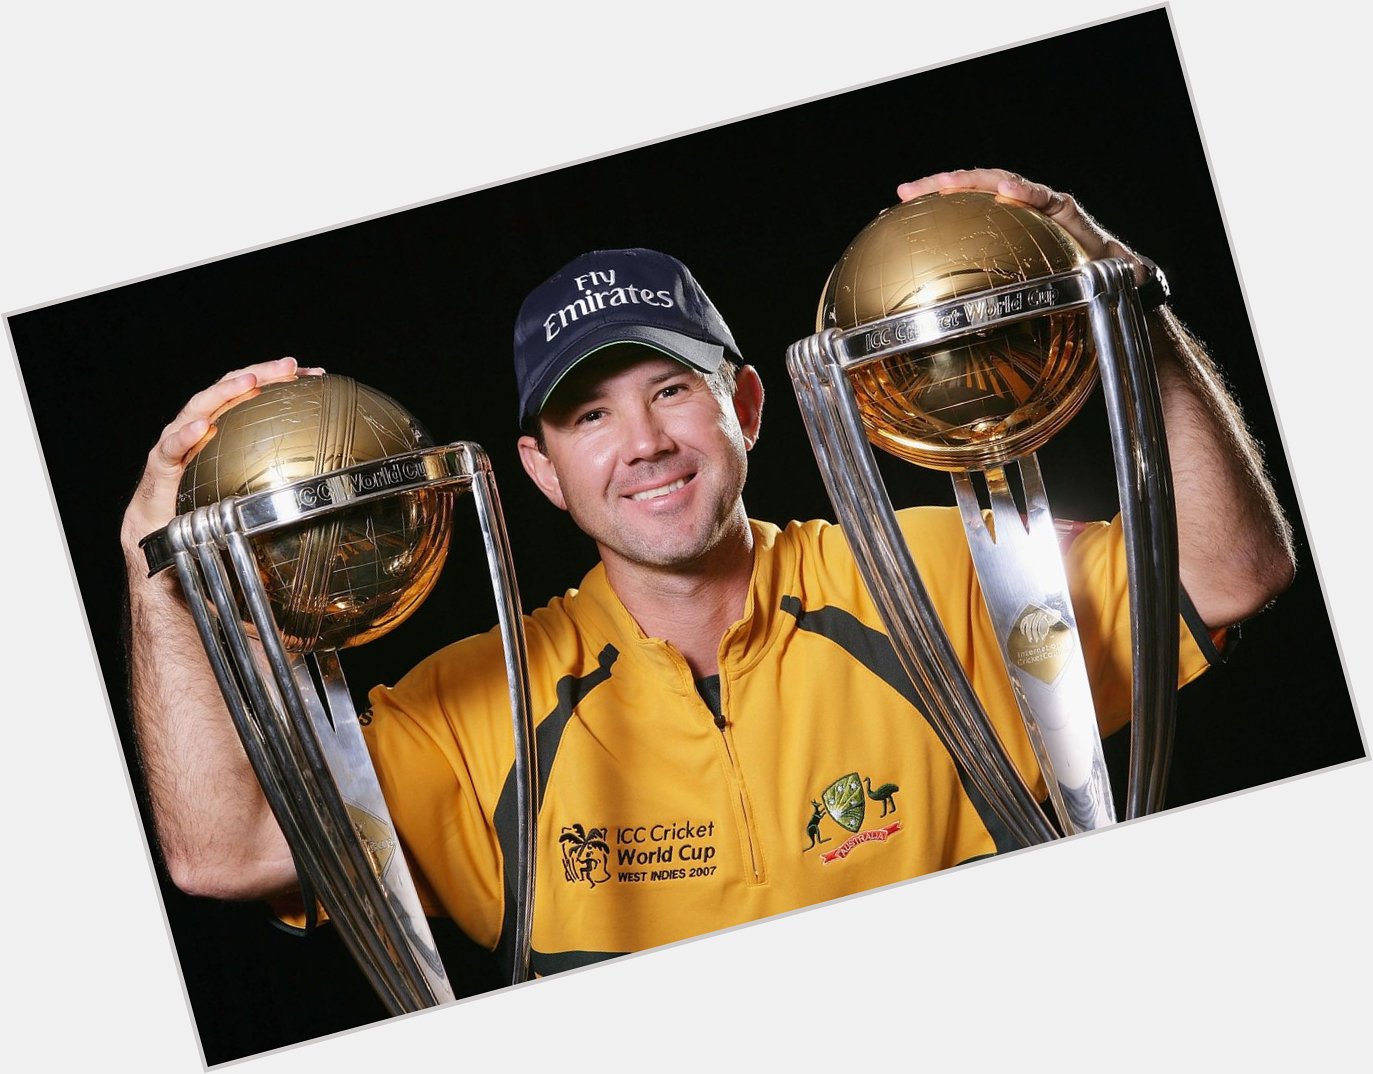 Wishing You A Very Happy Birthday Ricky Ponting. One Of The Greatest Legend Of His Era.    